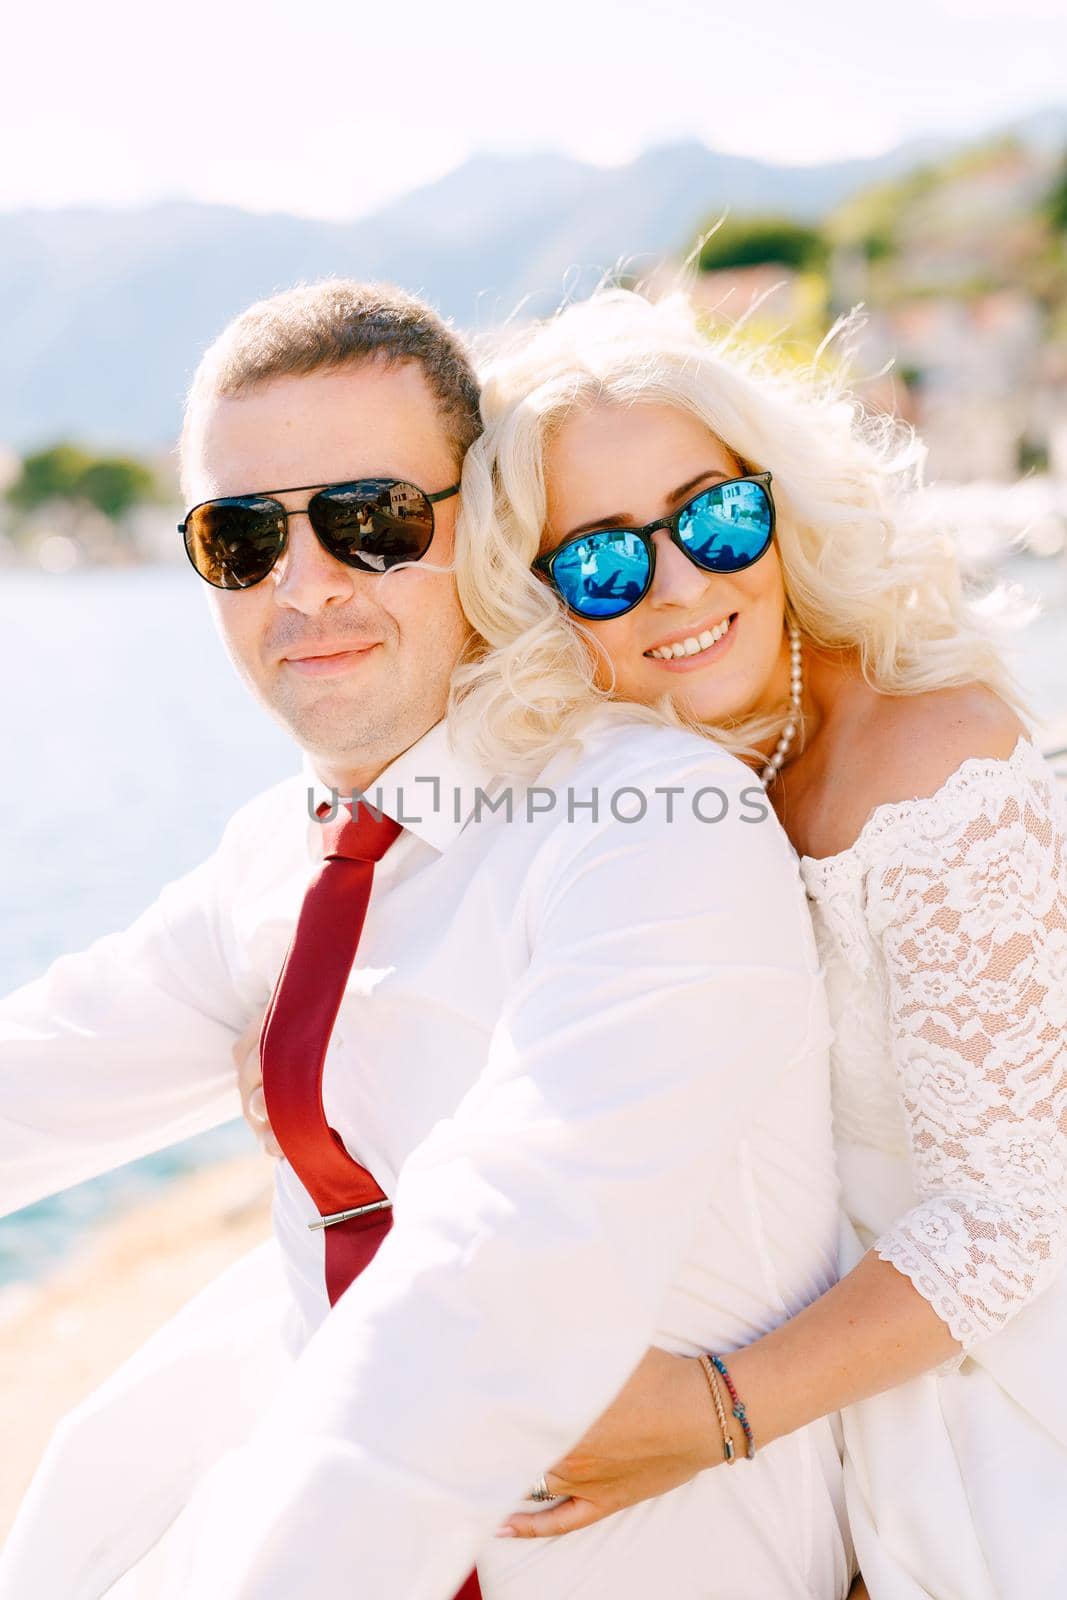 The bride and groom in sunglasses sit embracing on the pier in Perast, the bride is snuggling against the back of the groom . High quality photo